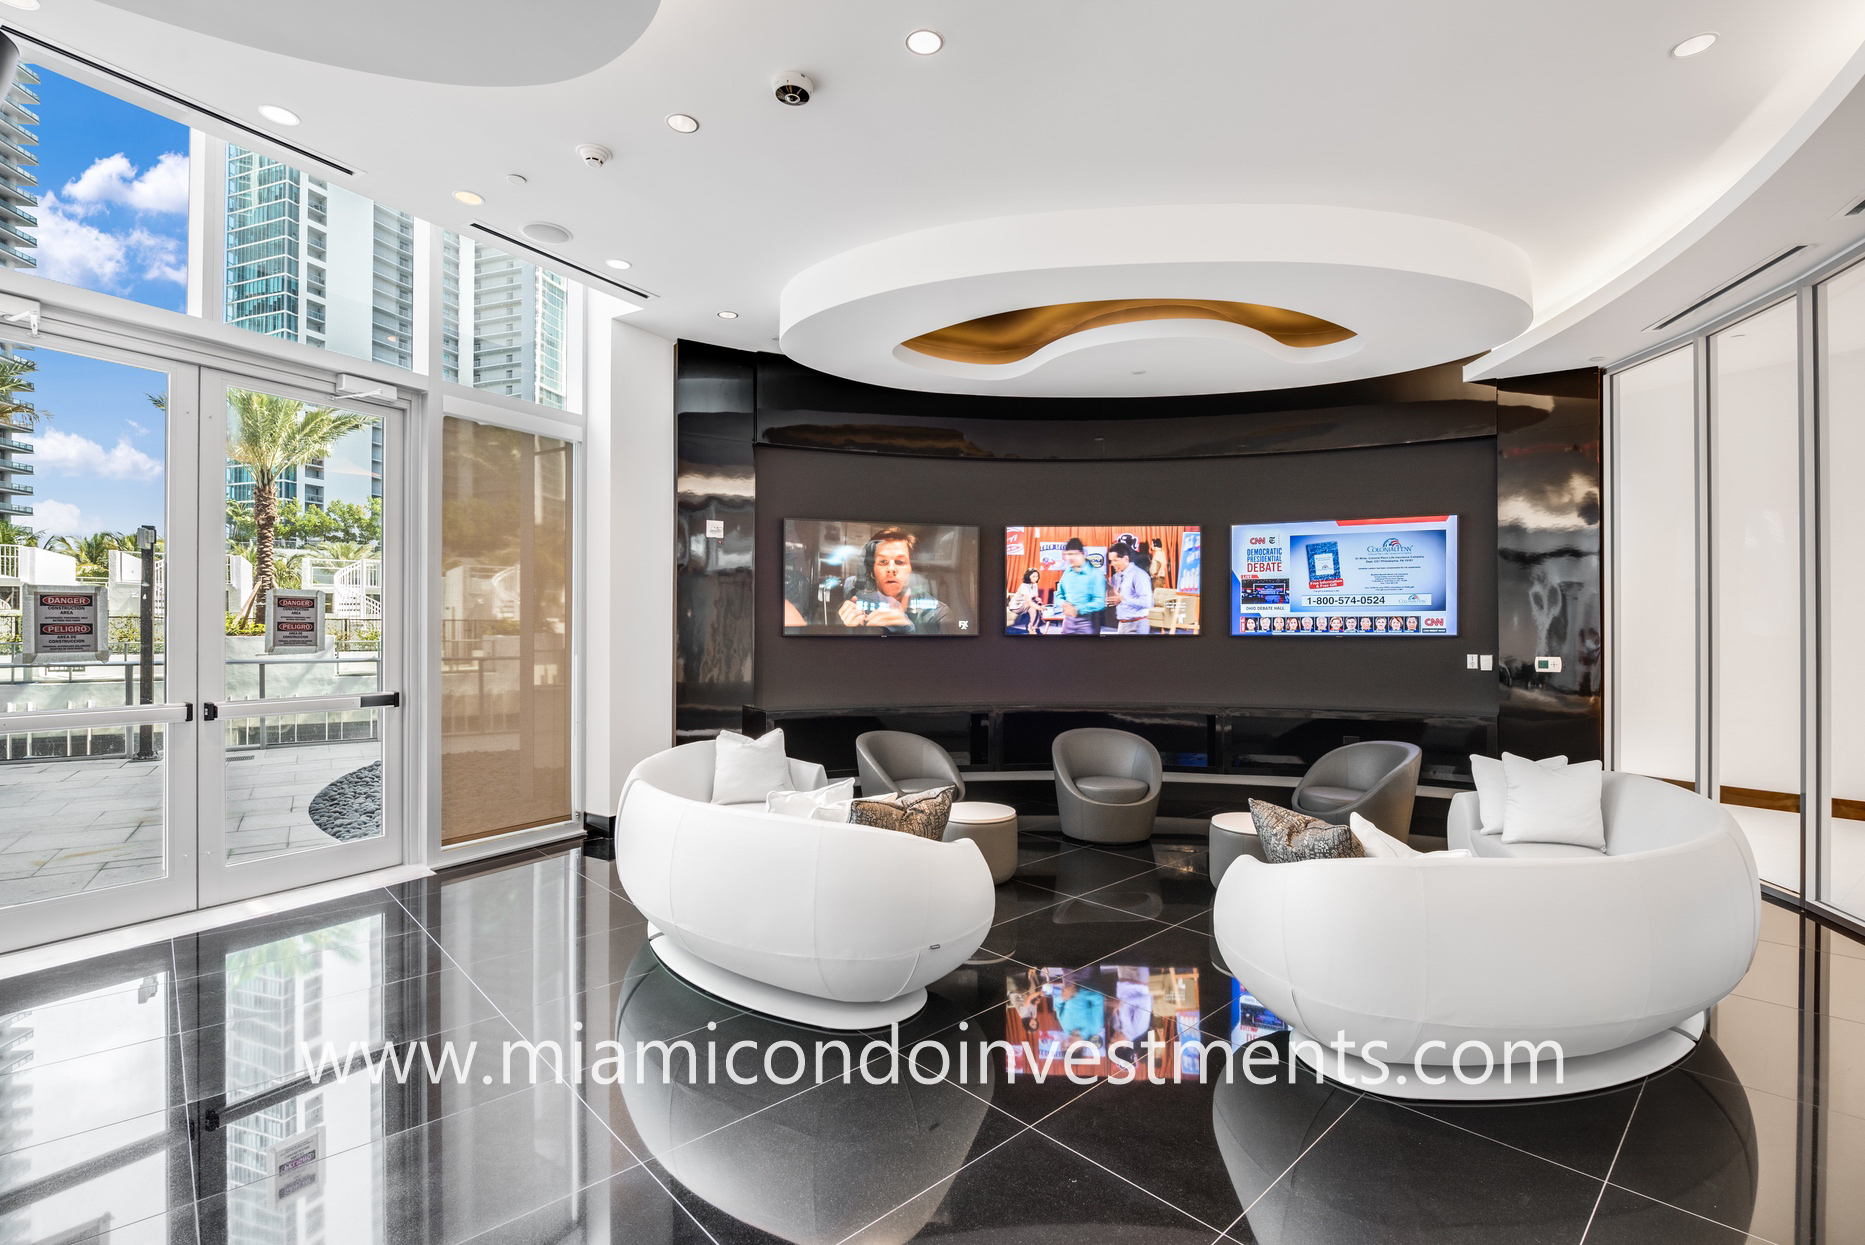 Paramount Miami Worldcenter game room